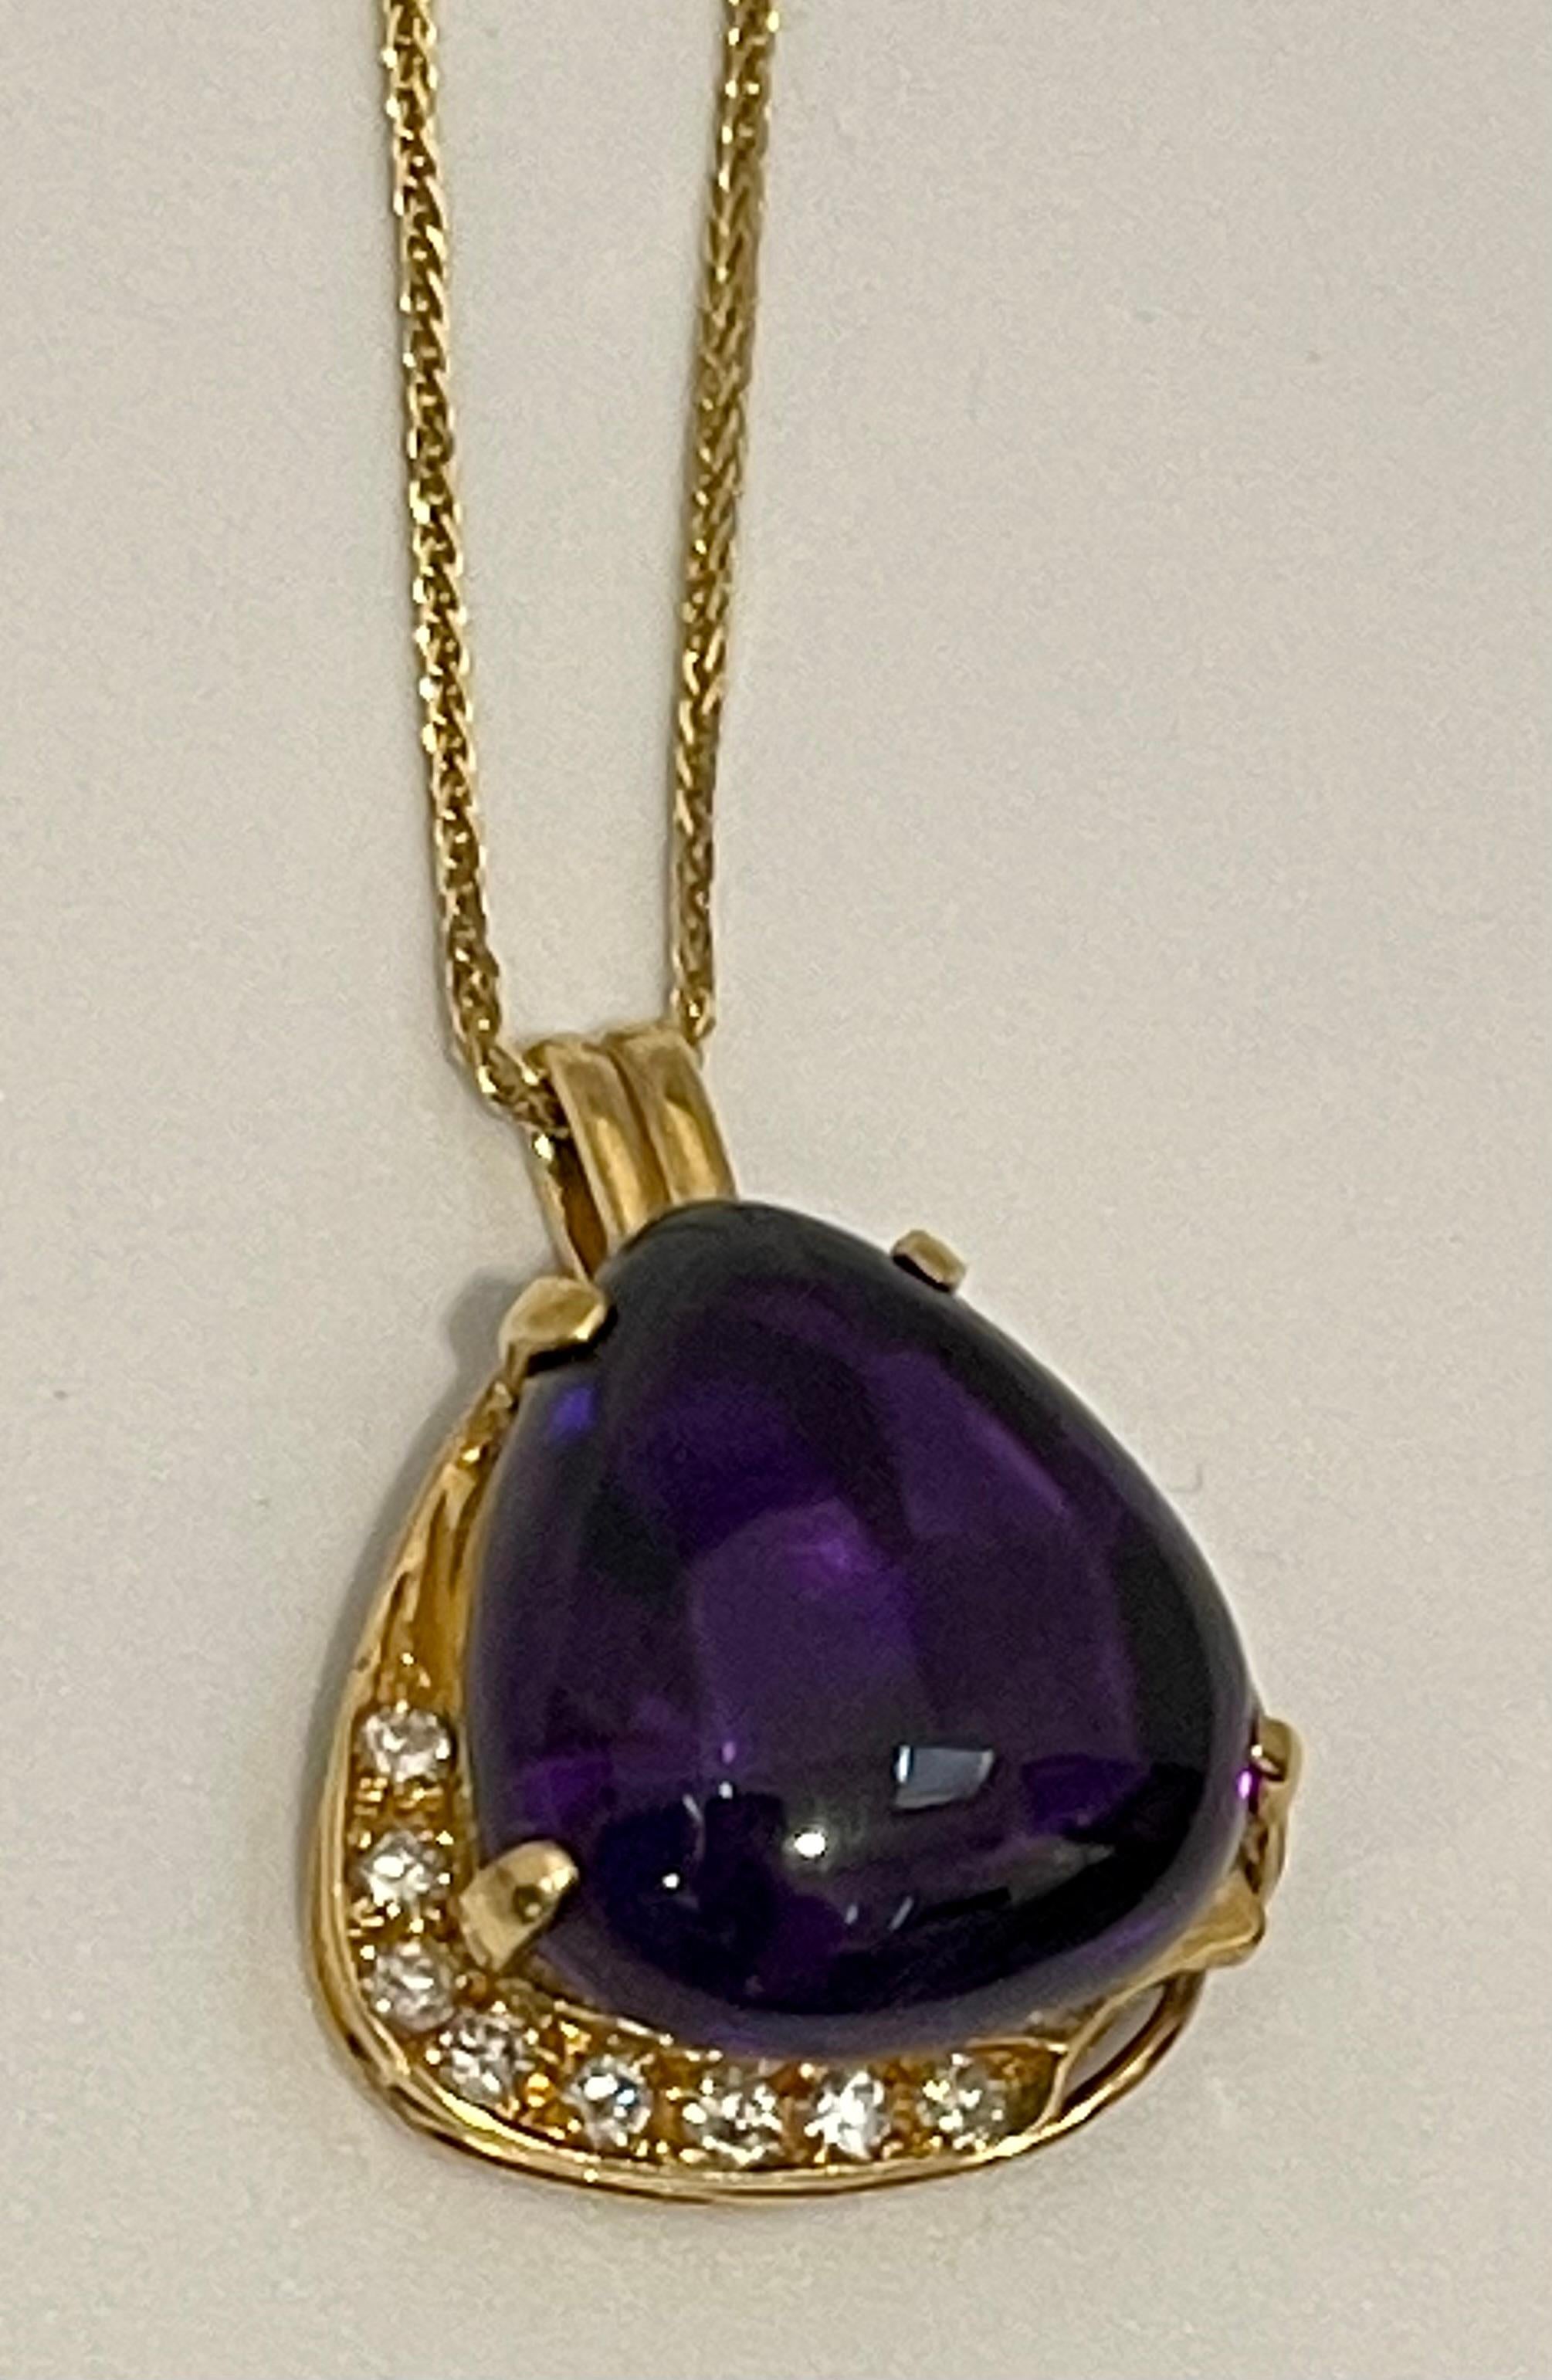 10 Carat Tear Drop Amethyst and Diamonds Pendent Necklace 18 Karat Yellow Gold For Sale 2